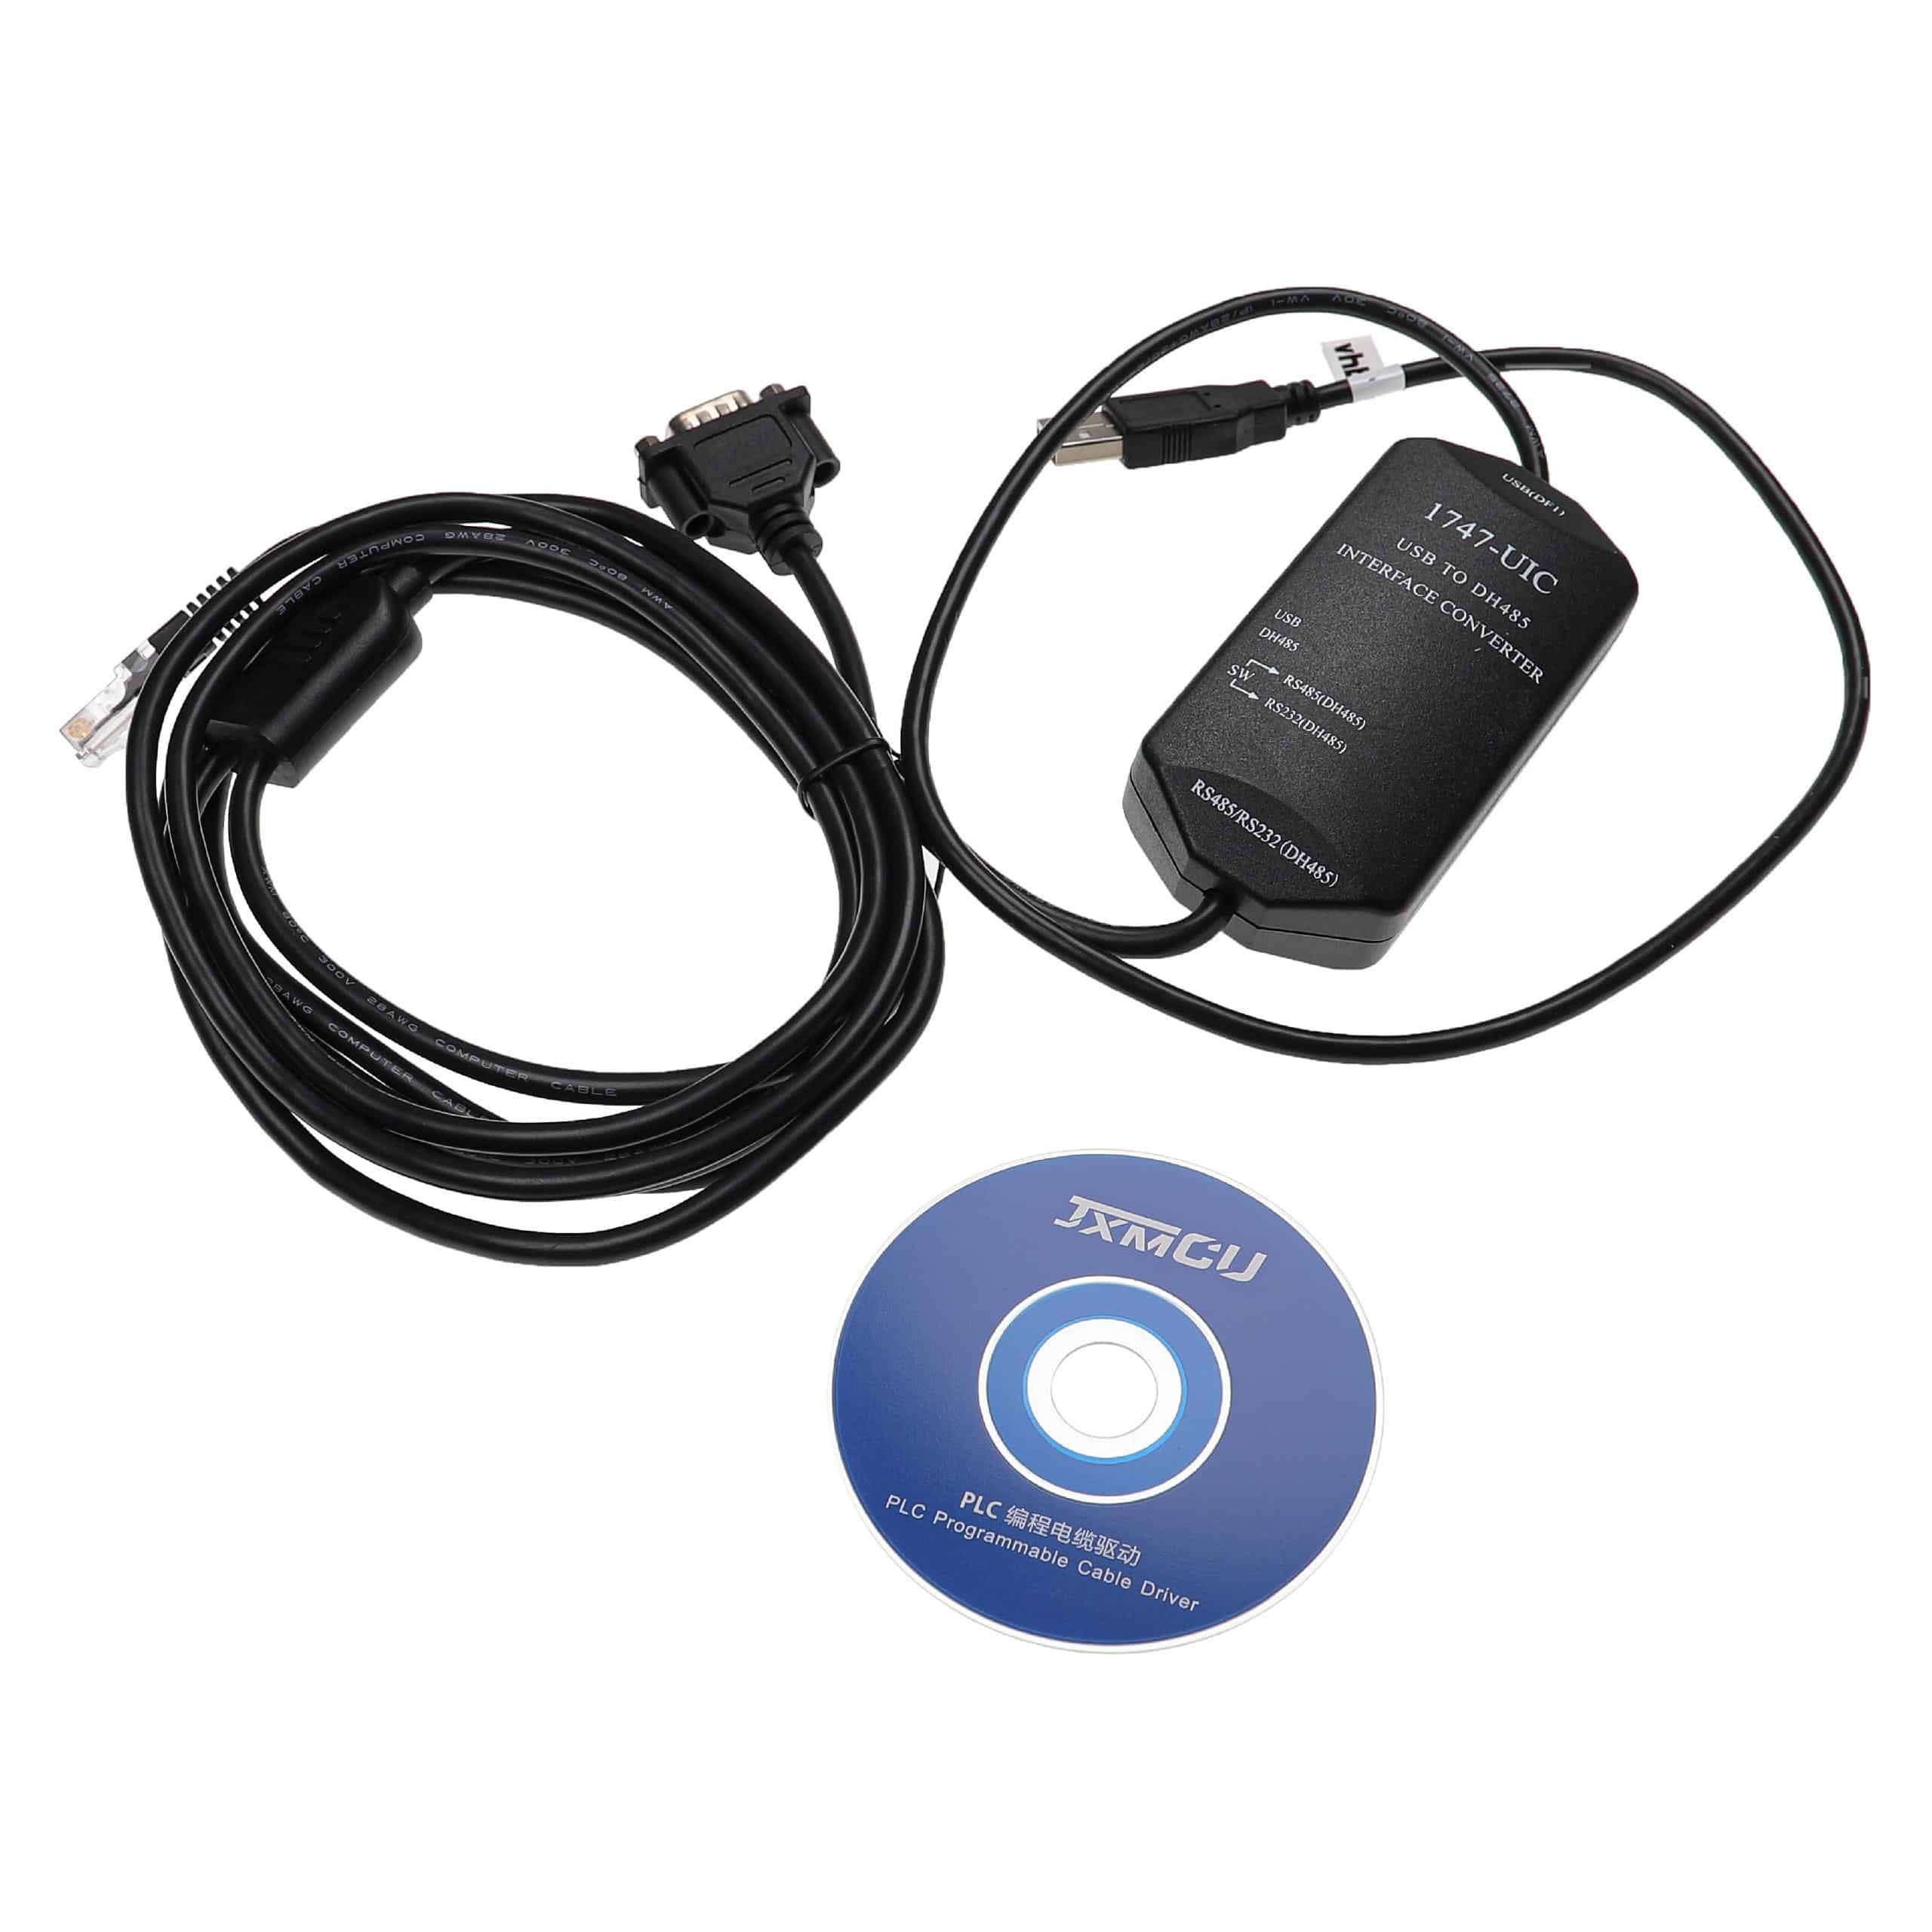 Programming Lead RS-232 suitable for ABSLC5/01/02/03/05 Radio Devices - Adapter + CD Driver 300cm, Black